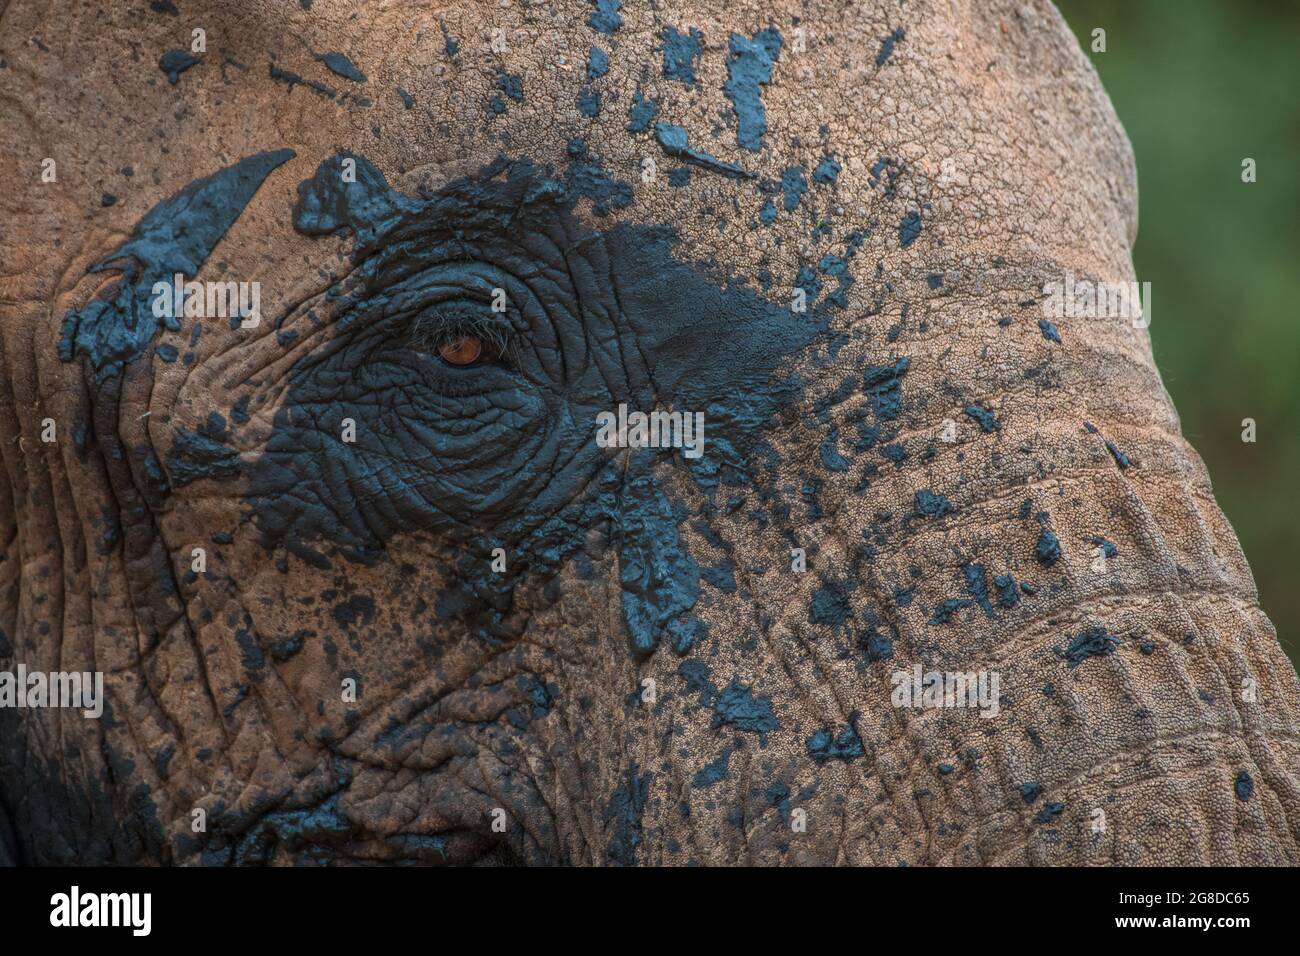 Elephant with mud on it's face having splashed it around itself during a mud bath, close-up of eye, muddy texture Stock Photo